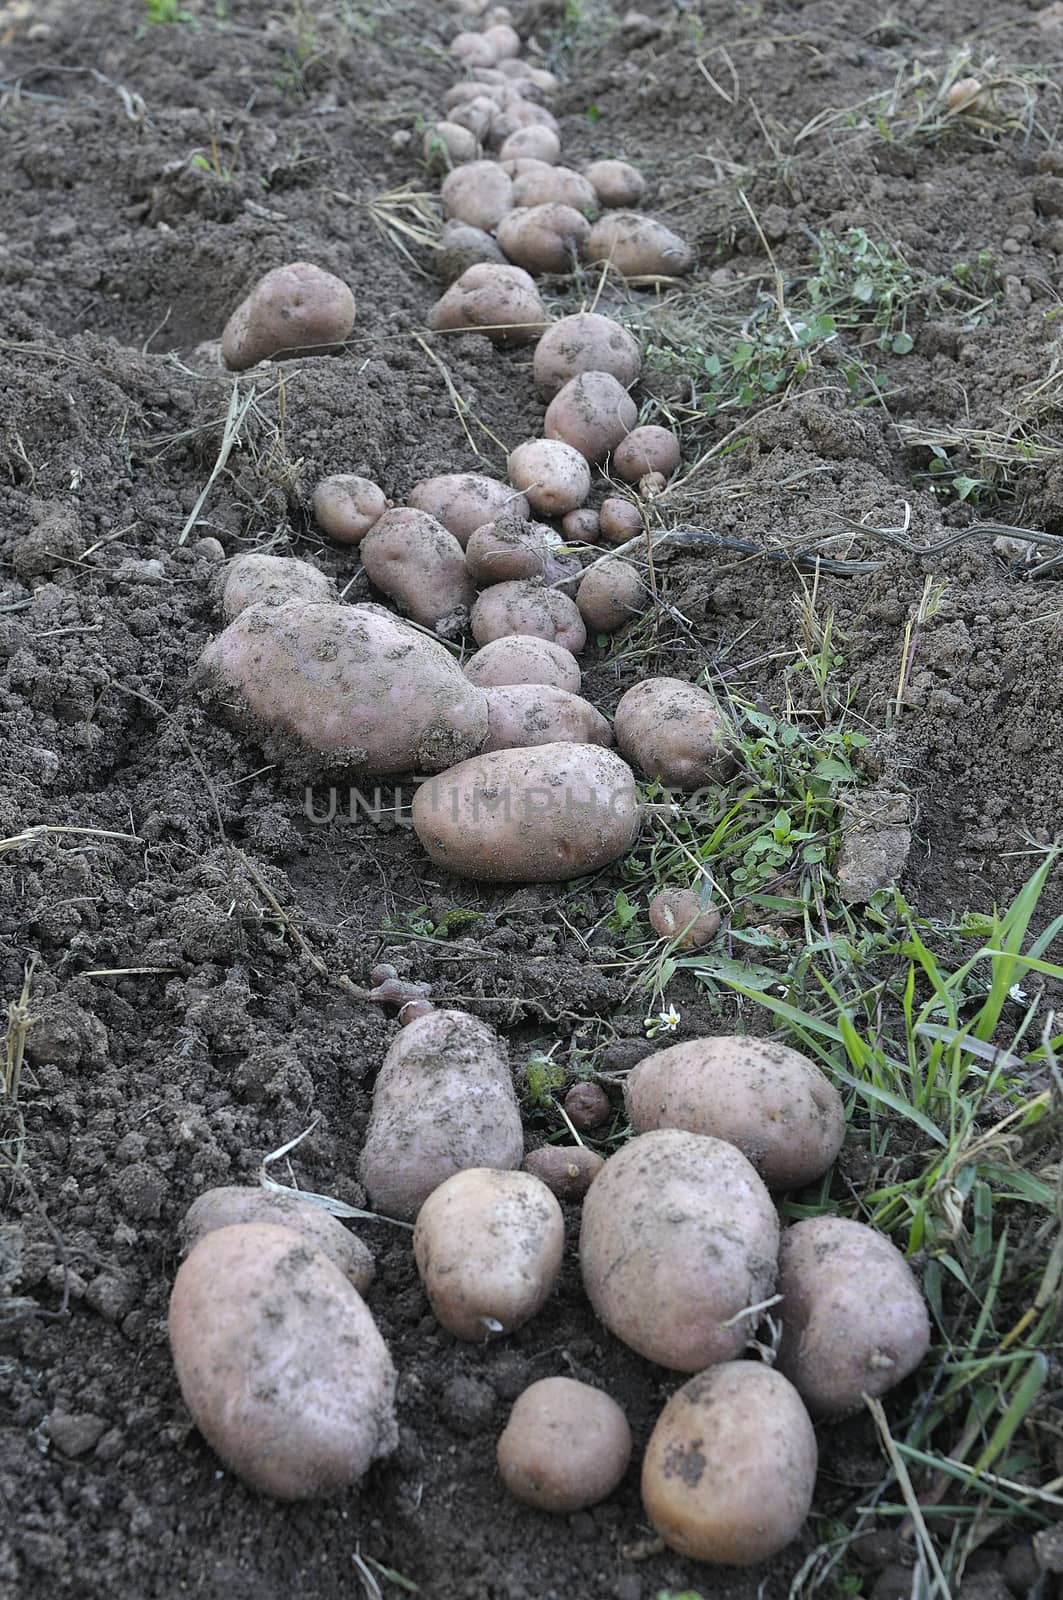 Cultivation and harvesting of potatoes in the garden by jalonsohu@gmail.com